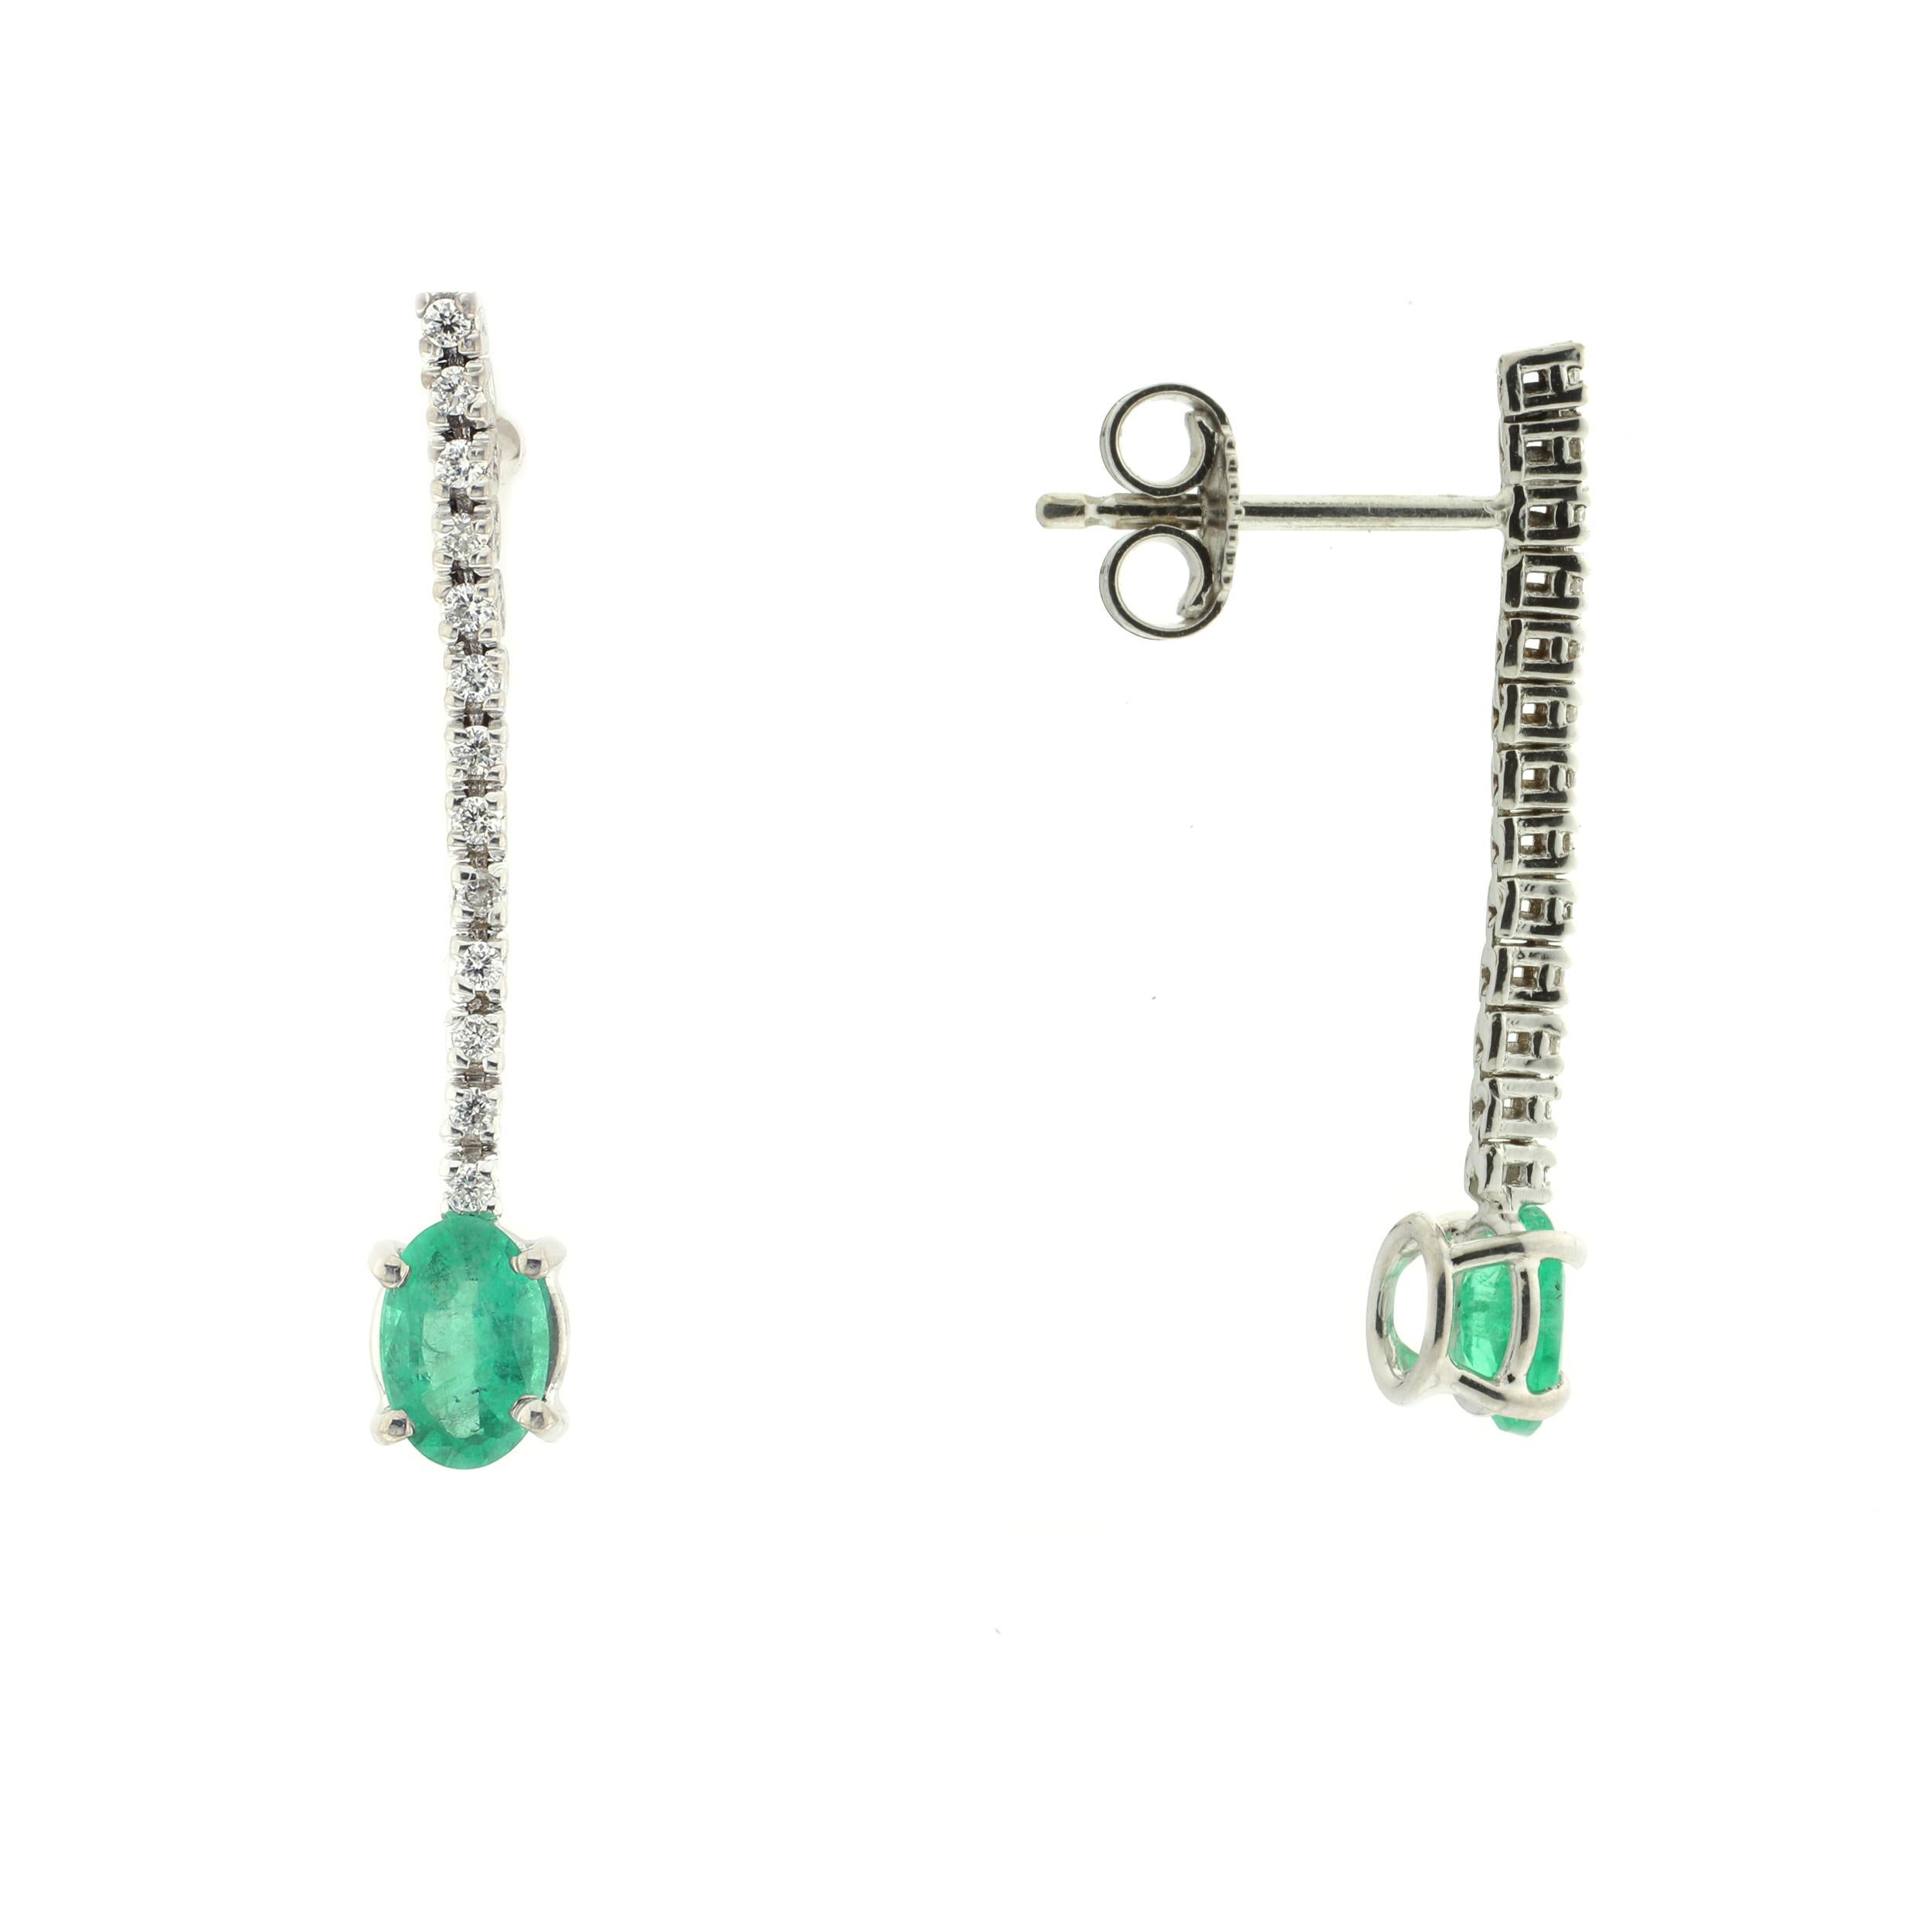 Modern 21st Century 18 Karat White Gold with White Diamond and Emerald Drop Earrings For Sale